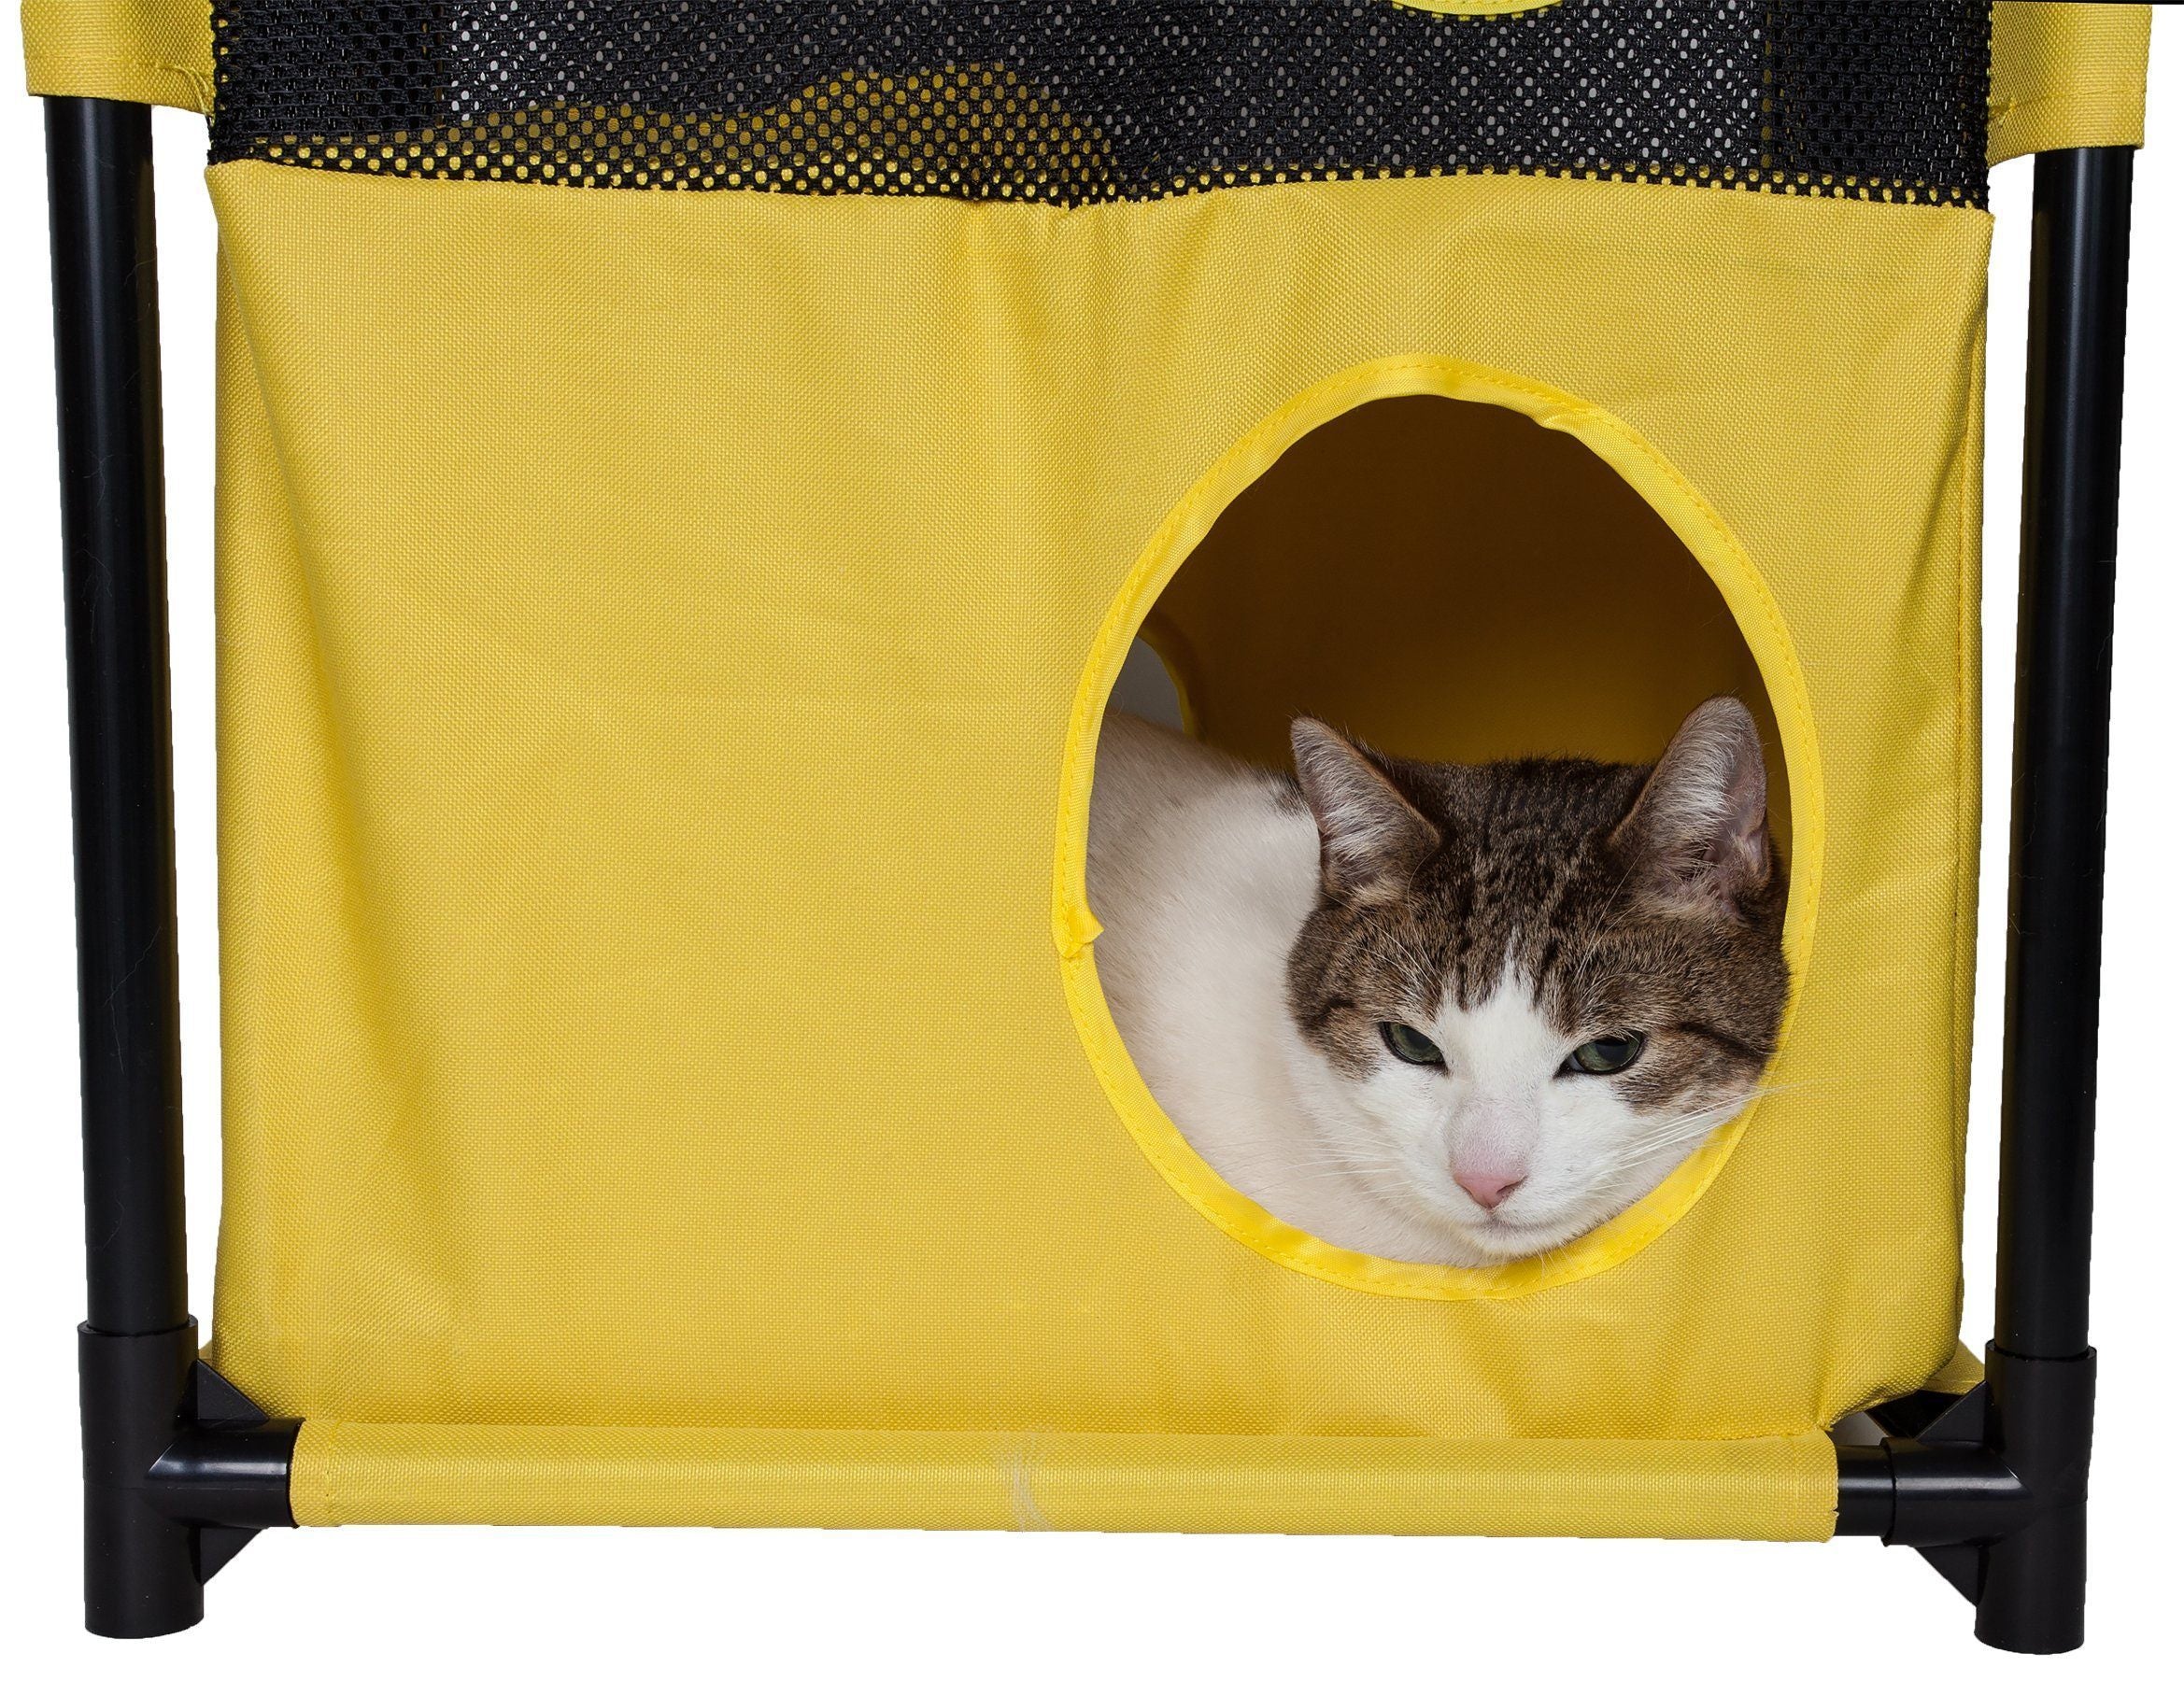 Pet Life ® 'Kitty-Square' Collapsible Travel Interactive Kitty Cat Tree Maze House Lounger Tunnel Lounge  